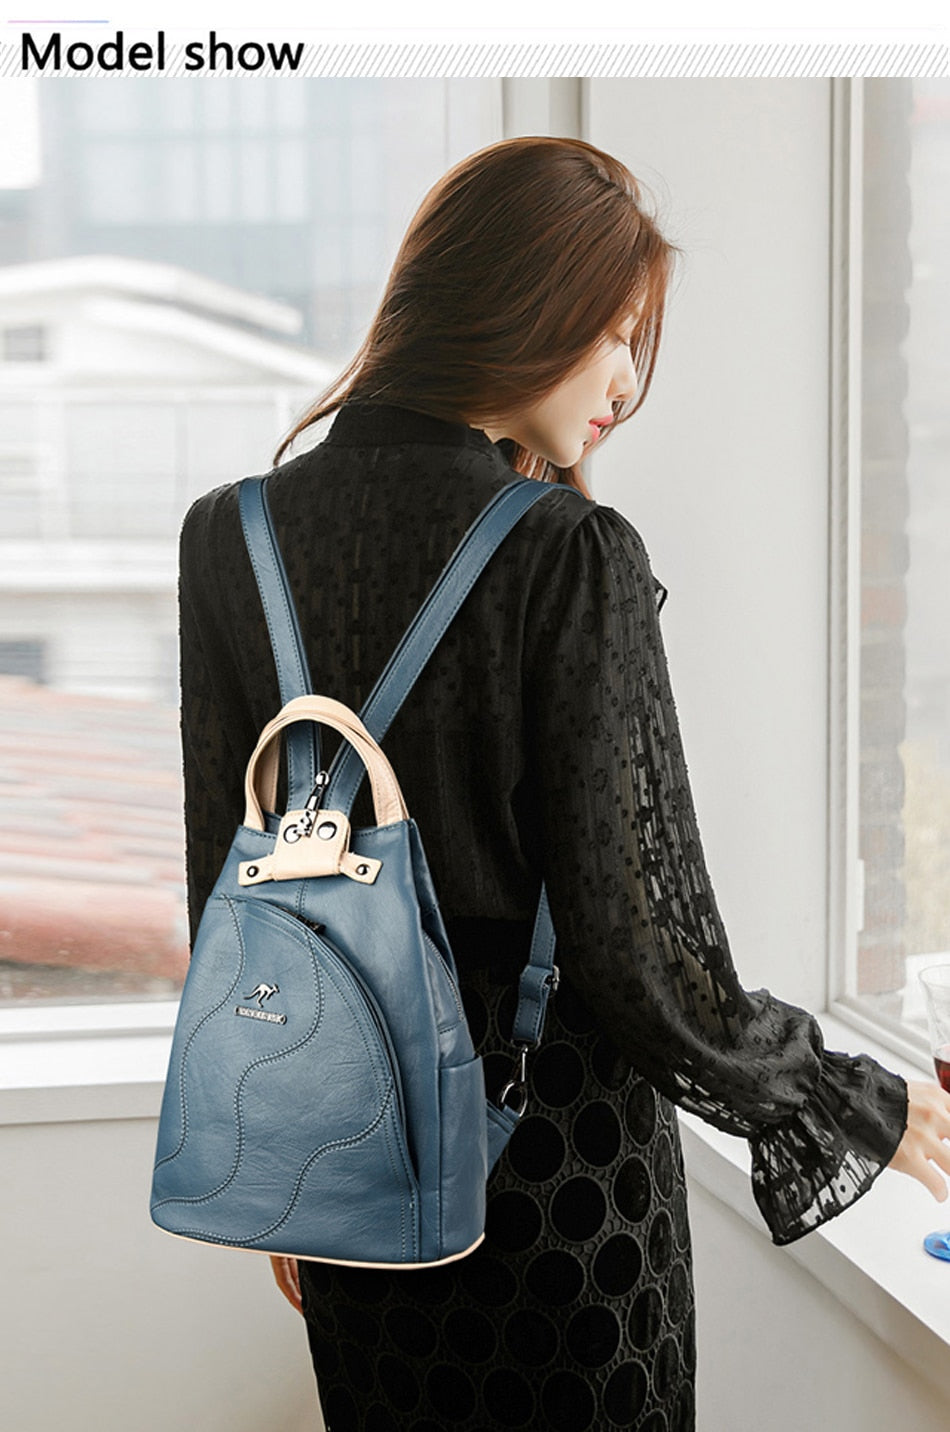 New Multifunctional Fashion Backpack For Women High Quality Leather Retro Backpack